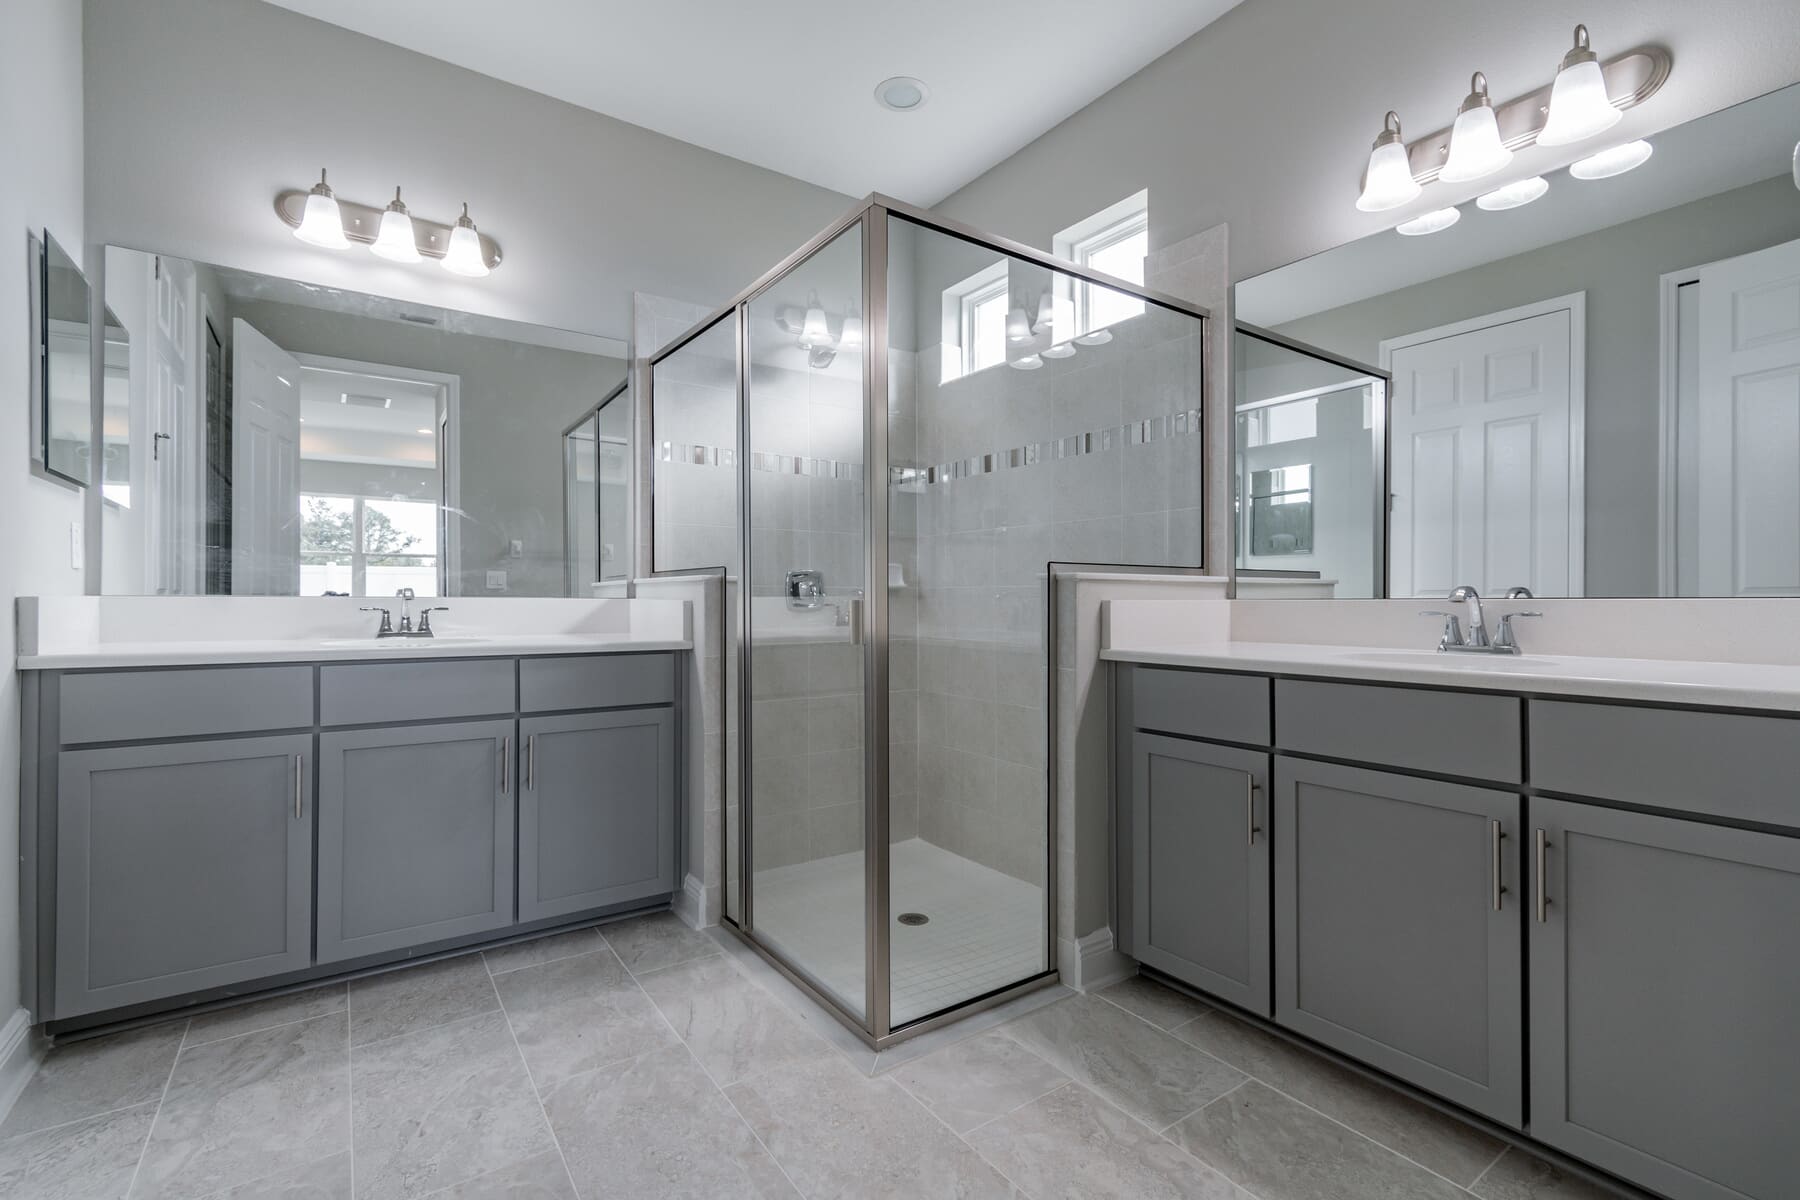 L-Shaped Bathroom With Two Vanities and Matching Lighting